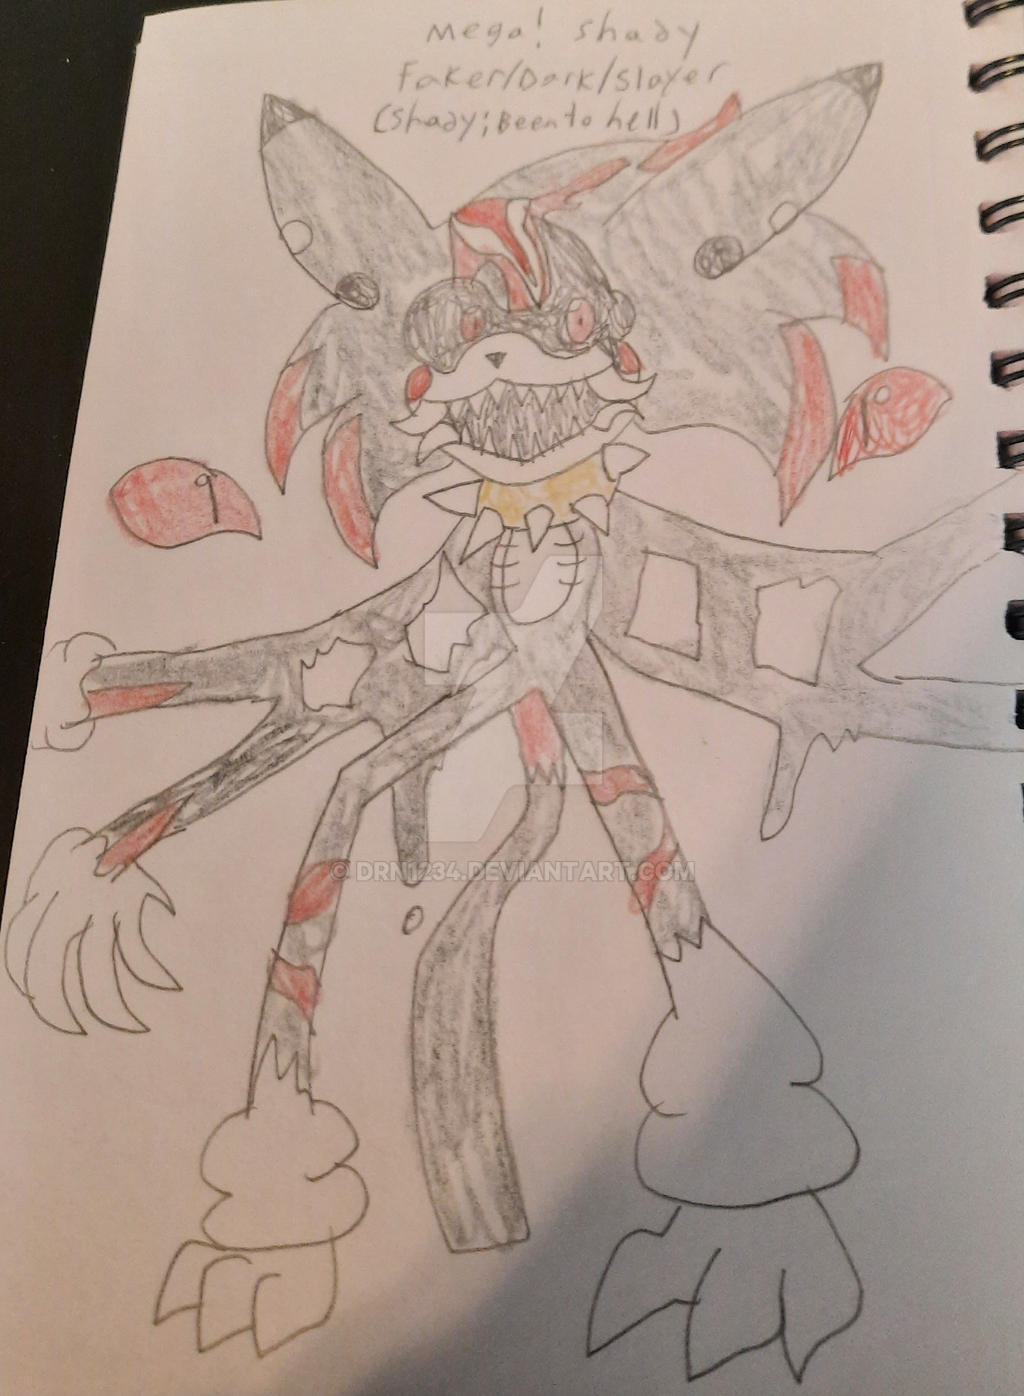 Lord x's true form by drn1234 on DeviantArt